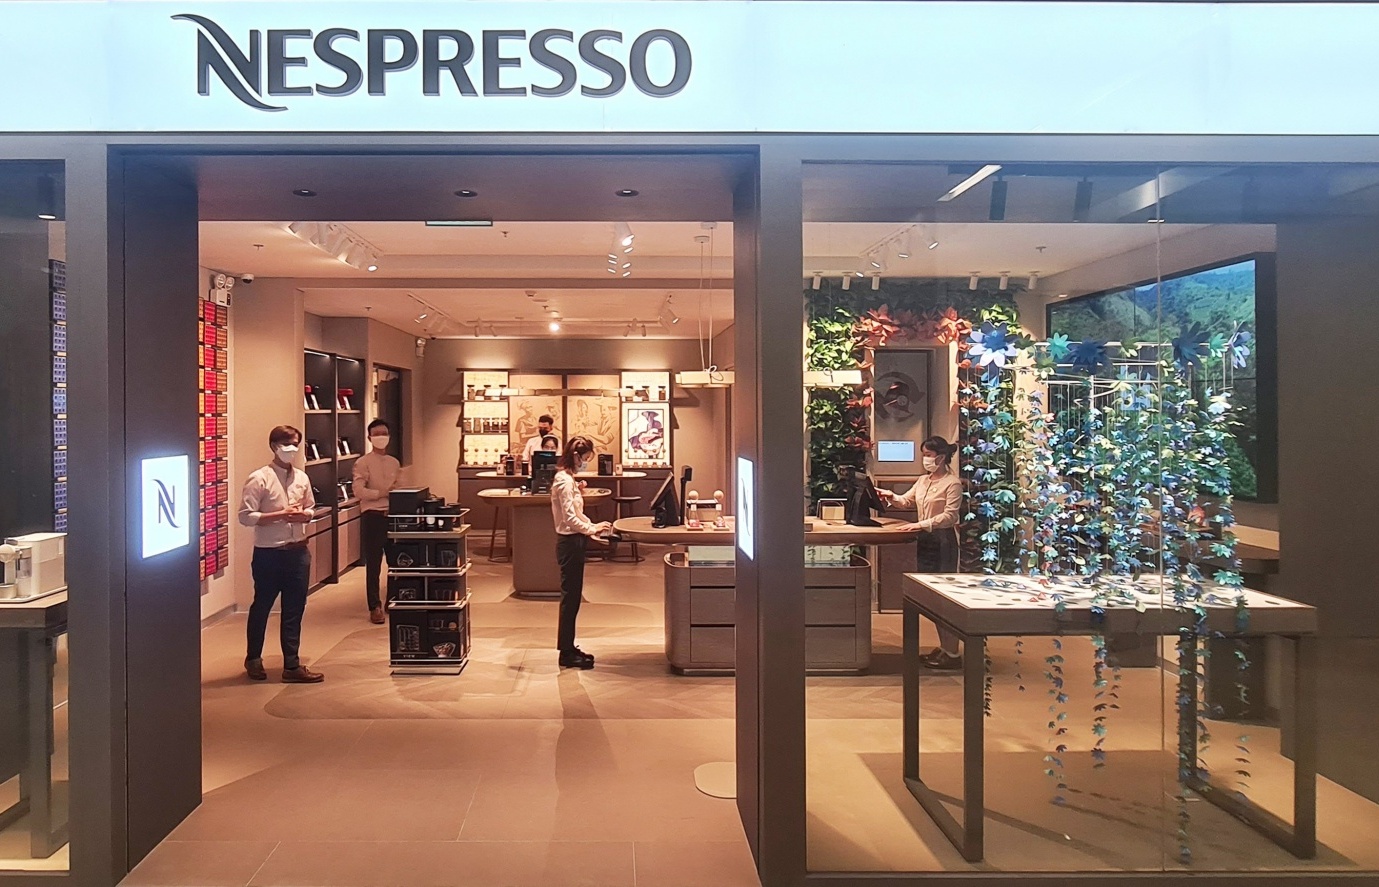 Nespresso Boutique opens Saigon Center outlet with new coffee experience